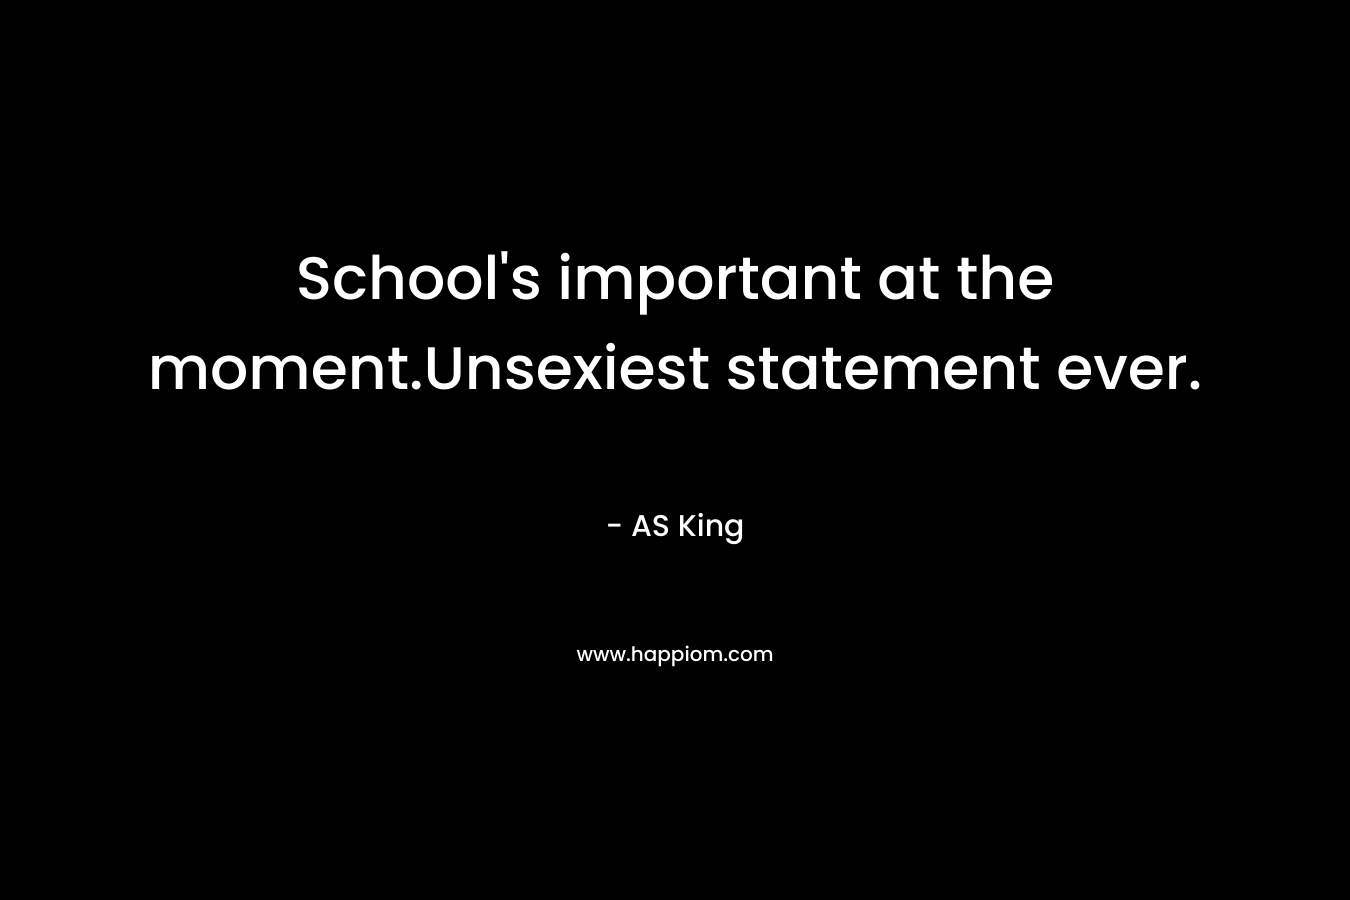 School’s important at the moment.Unsexiest statement ever. – AS King